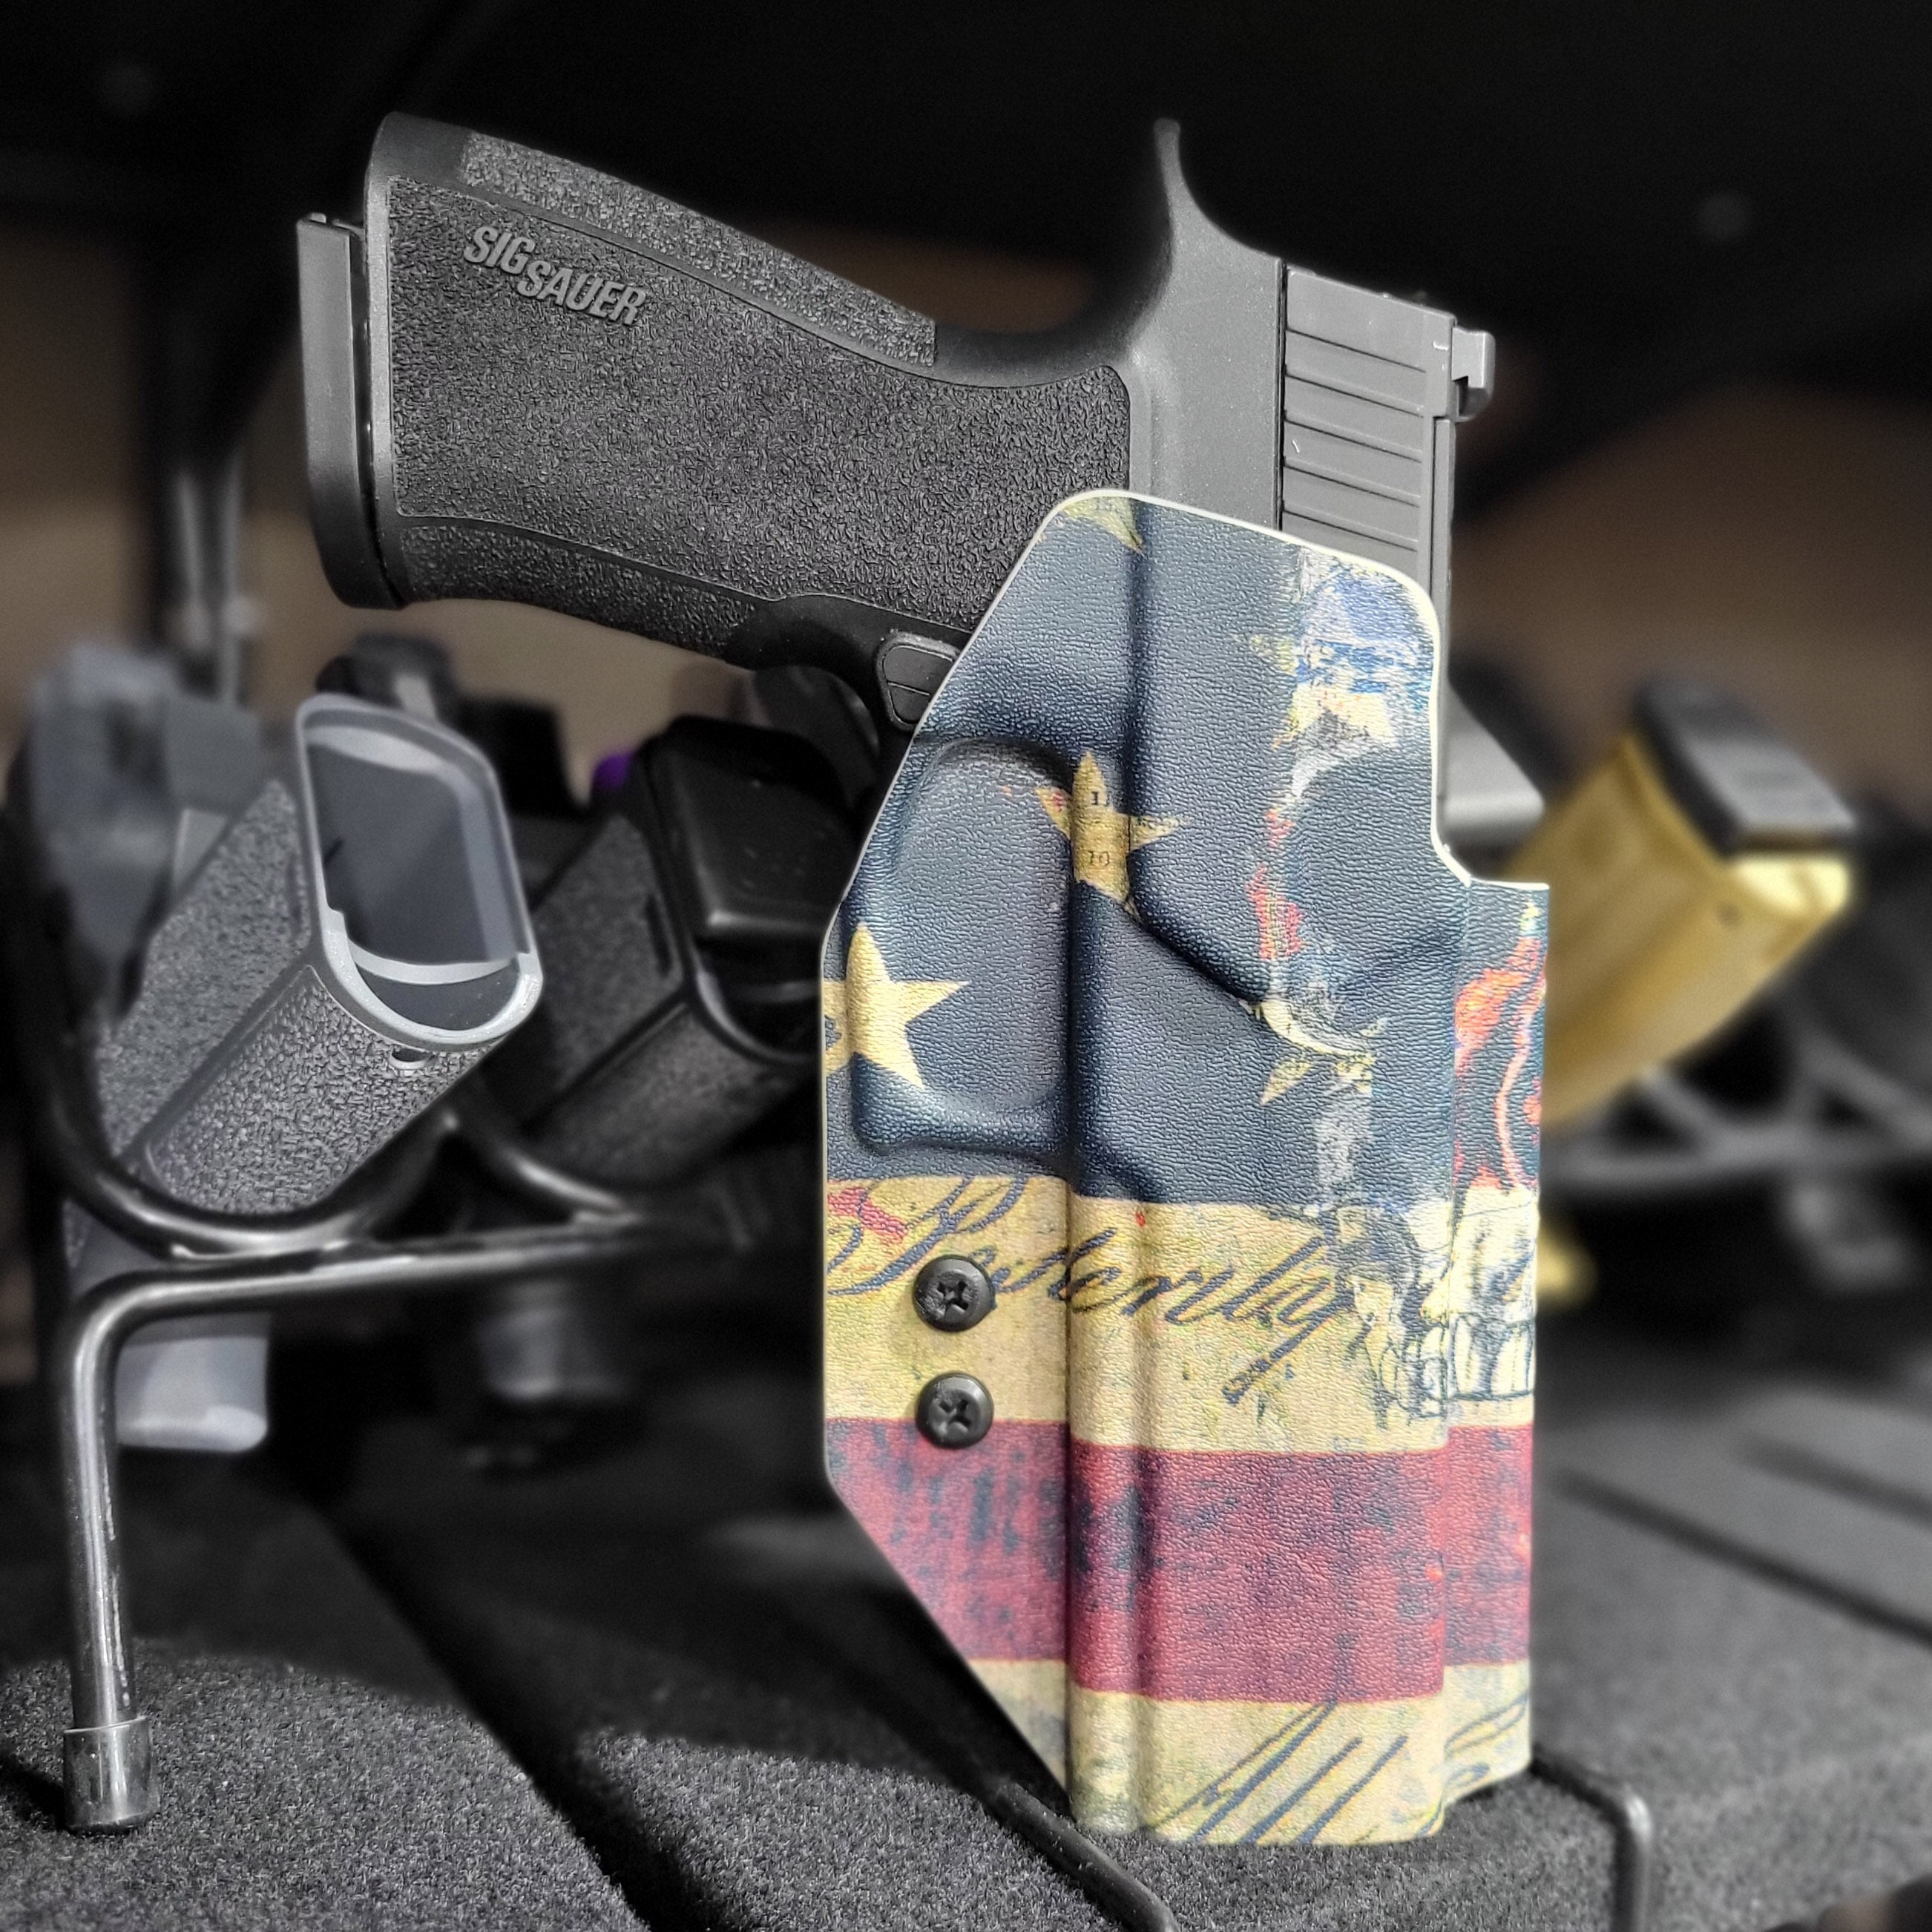 For the best, Outside Waistband OWB Kydex Holster designed to fit the Sig Sauer P320-XTEN 10MM handgun, shop Four Brothers Holsters.  Full sweat guard, adjustable retention, open muzzle, cleared for red dot sights.  Proudly made in the USA for veterans and law enforcement. 10 MM P320 XTEN, P320 X Ten or P 320  XTEN.